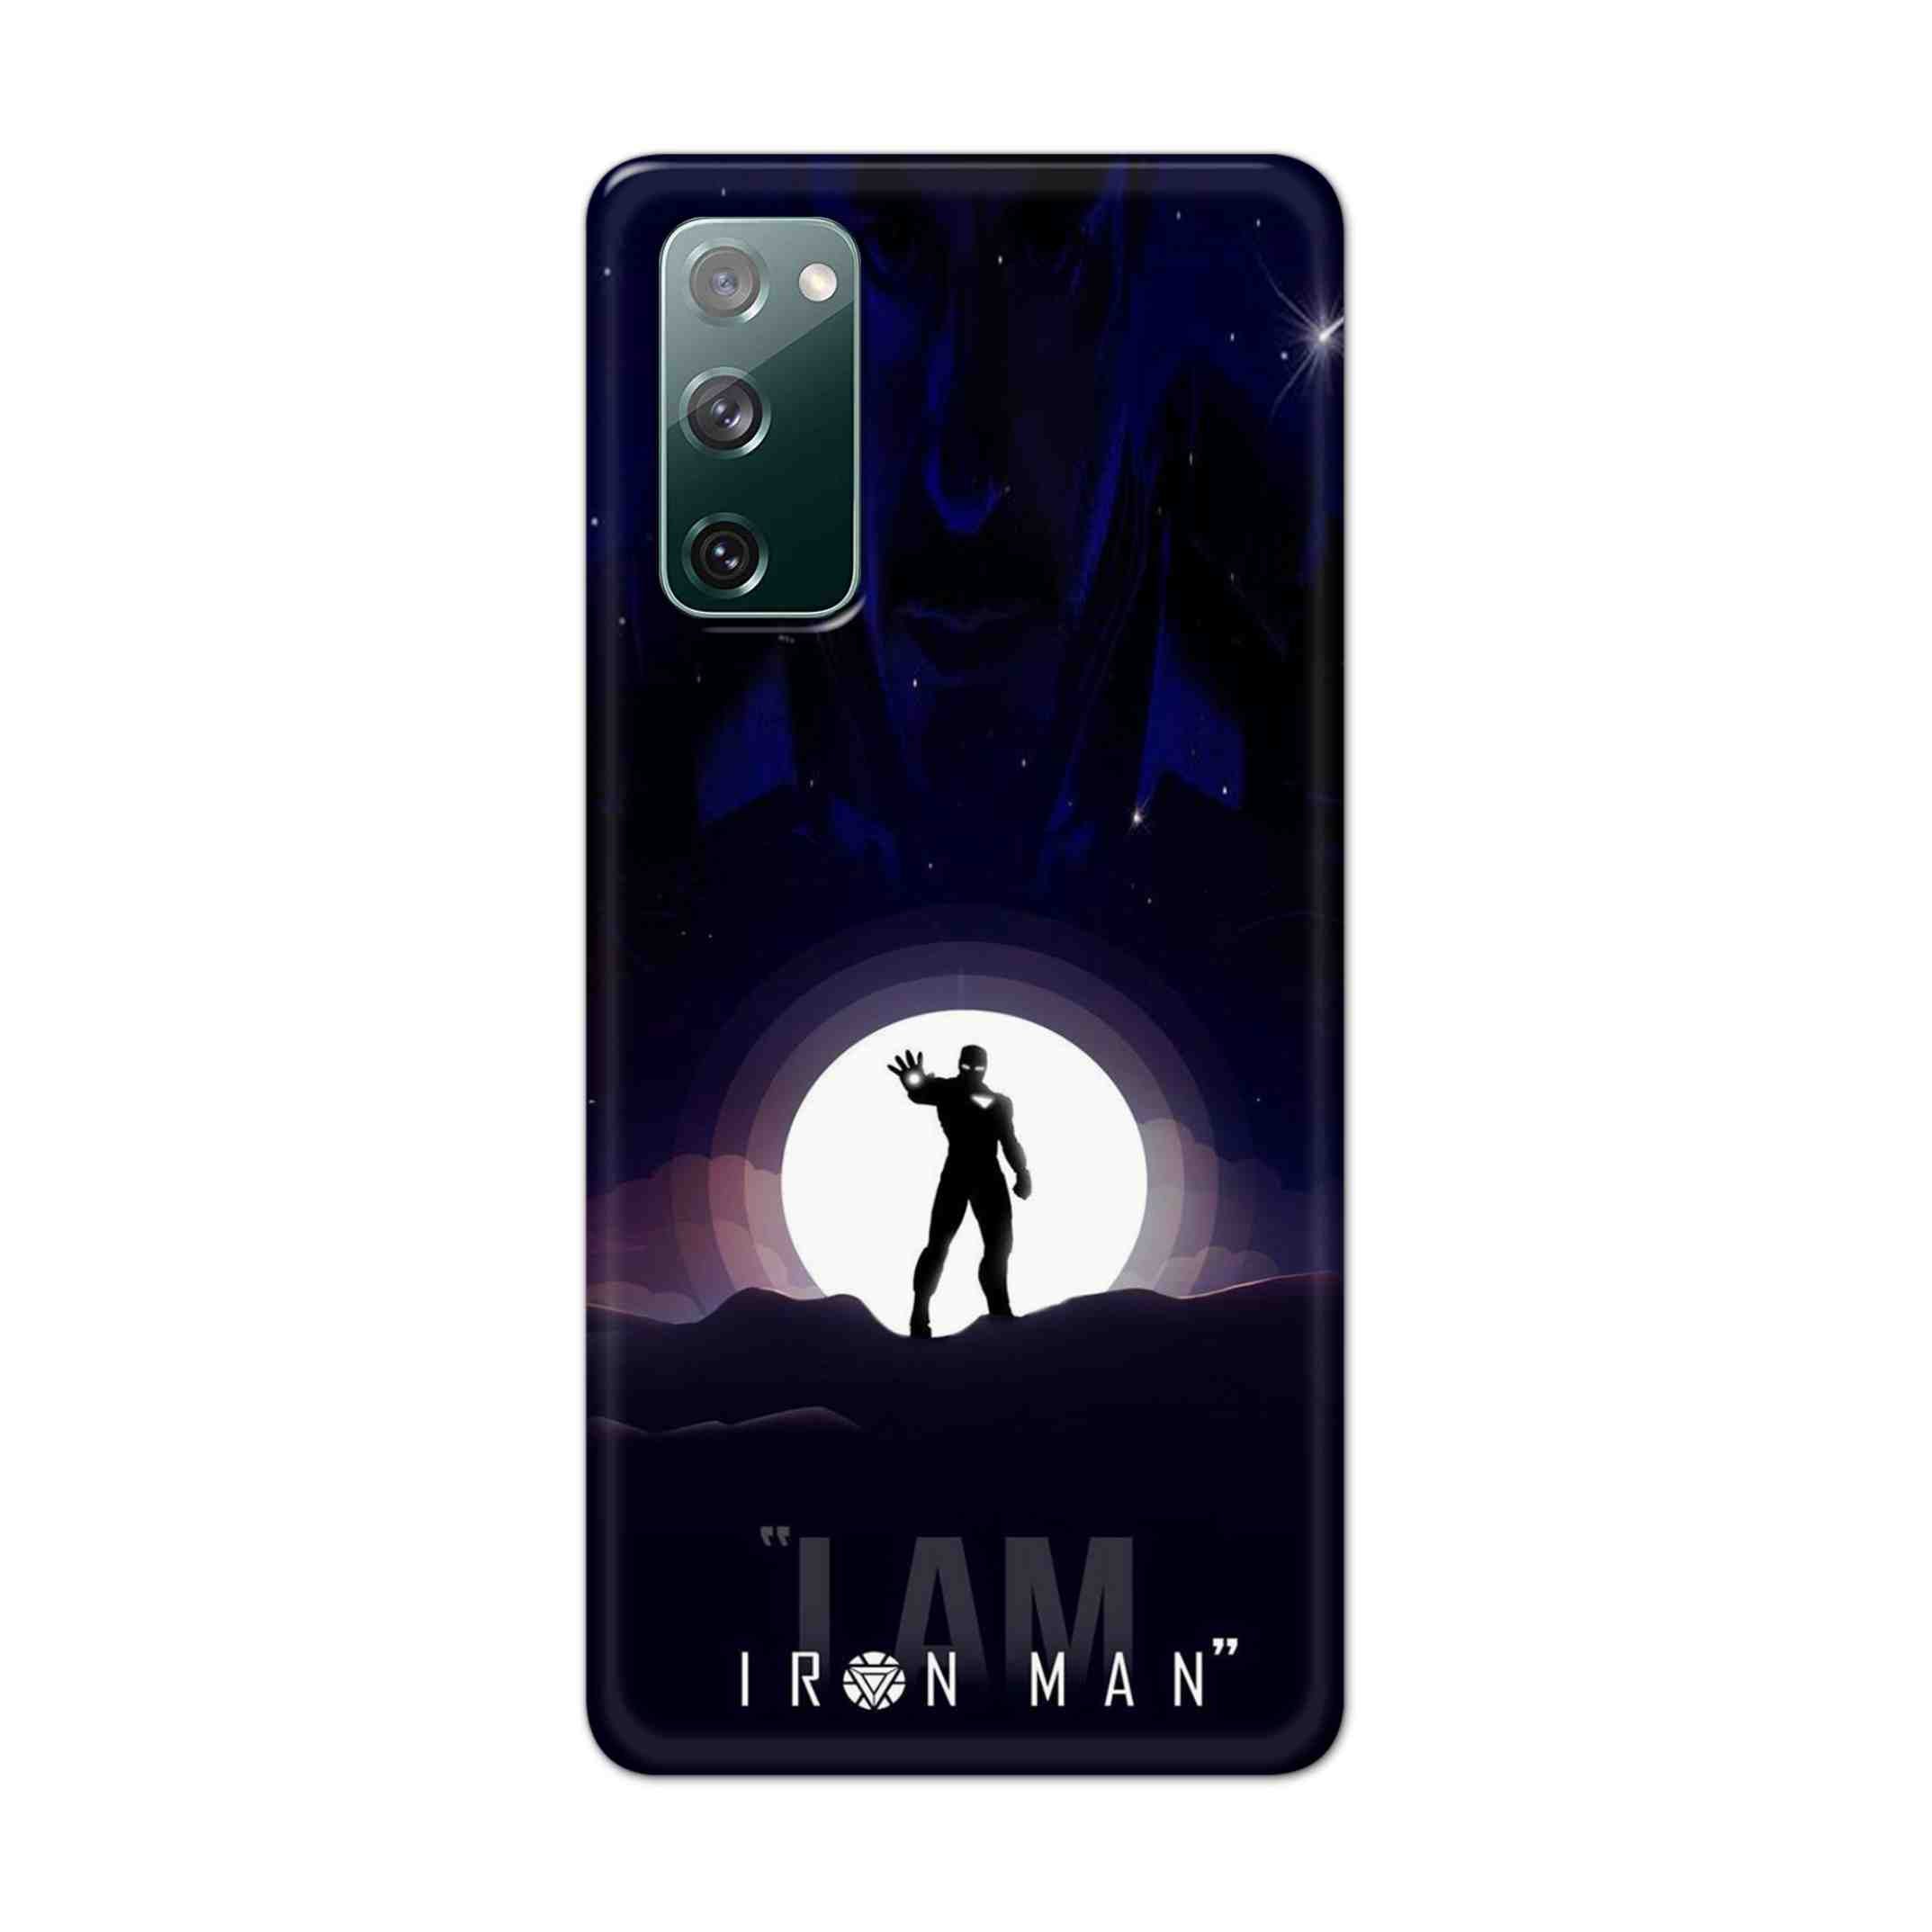 Buy I Am Iron Man Hard Back Mobile Phone Case Cover For Samsung Galaxy S20 FE Online